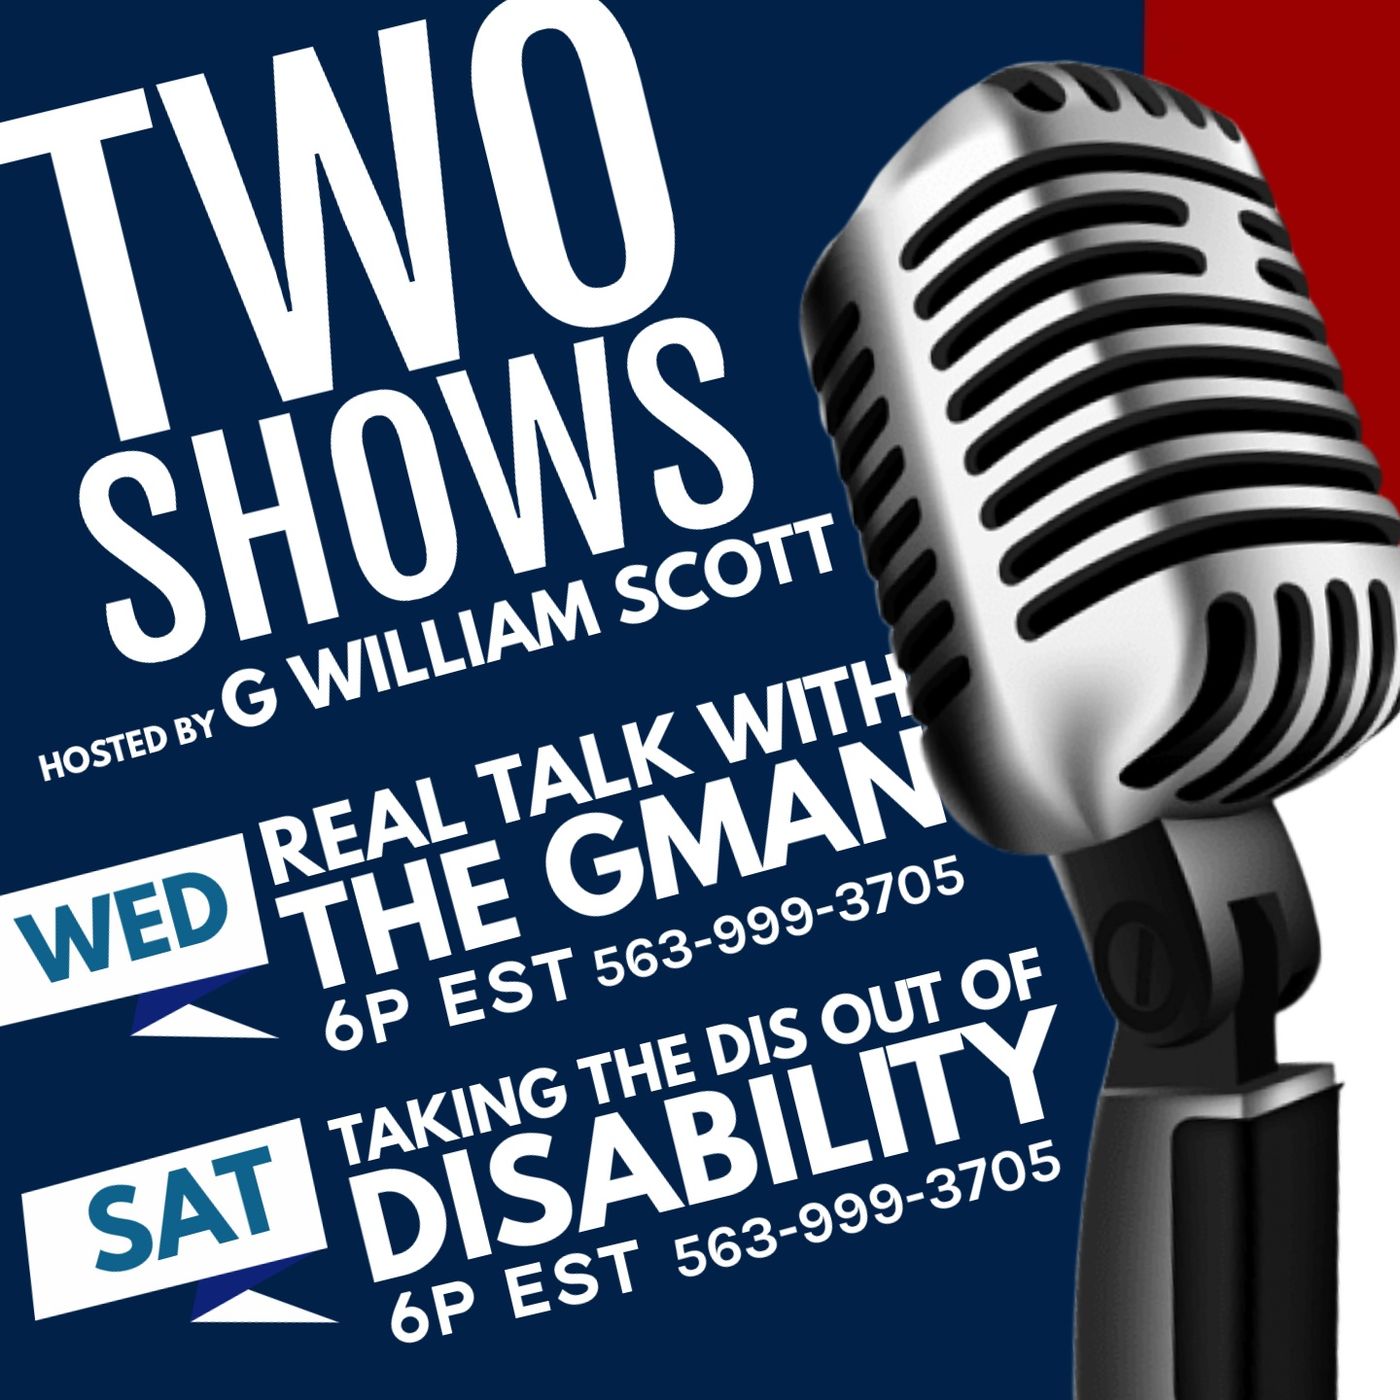 REAL TALK WITH THE GMAN, Hosted by G William Scott